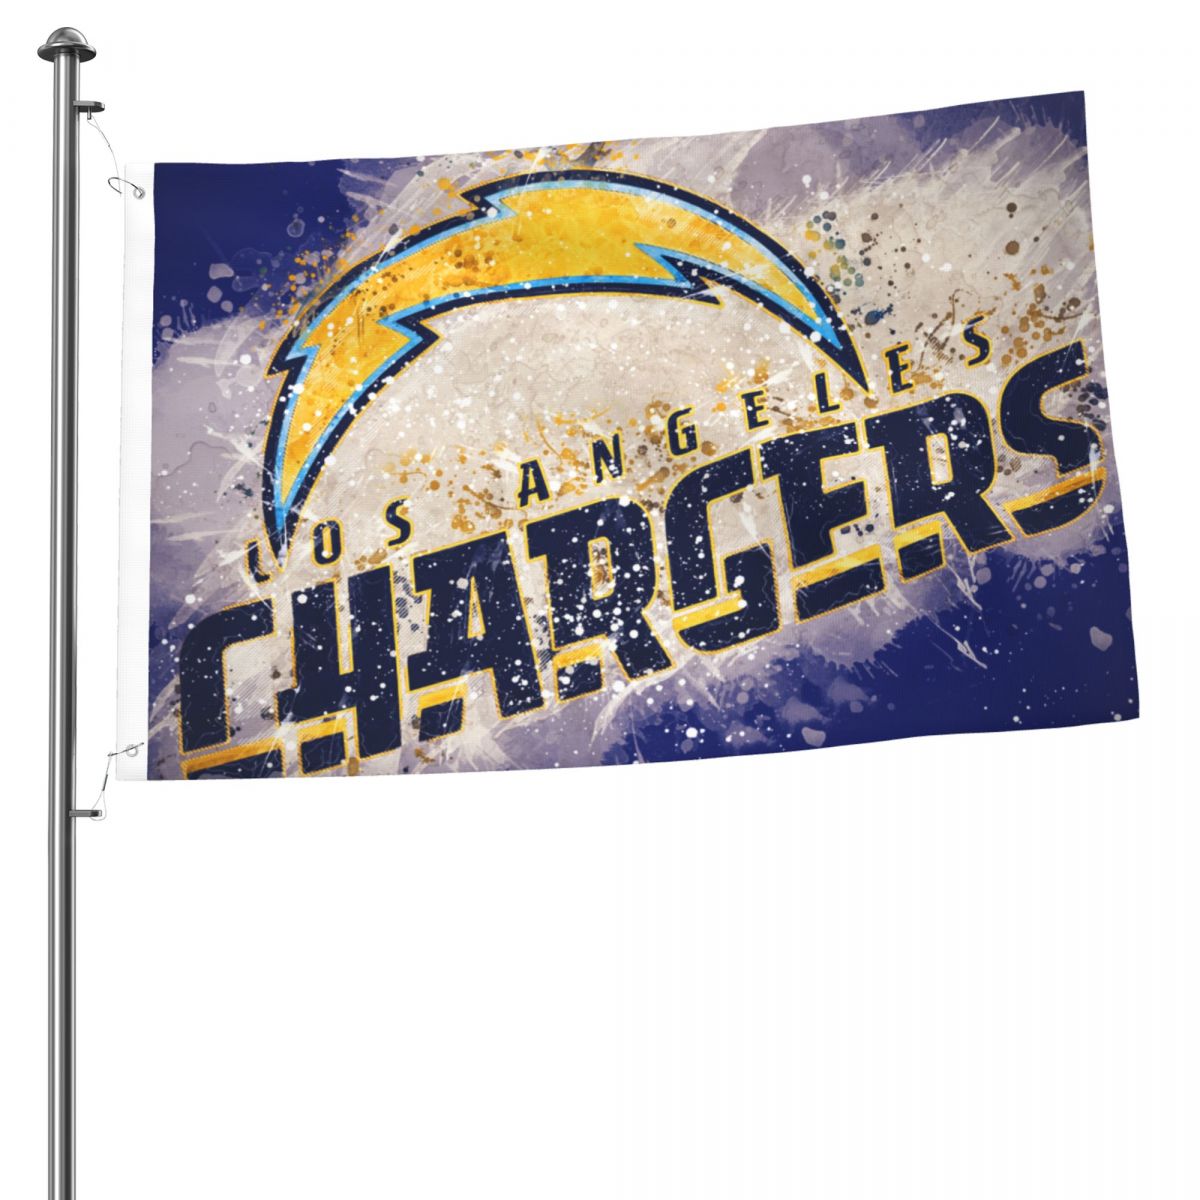 Los Angeles Chargers Logo Grunge Art 2x3FT Flag